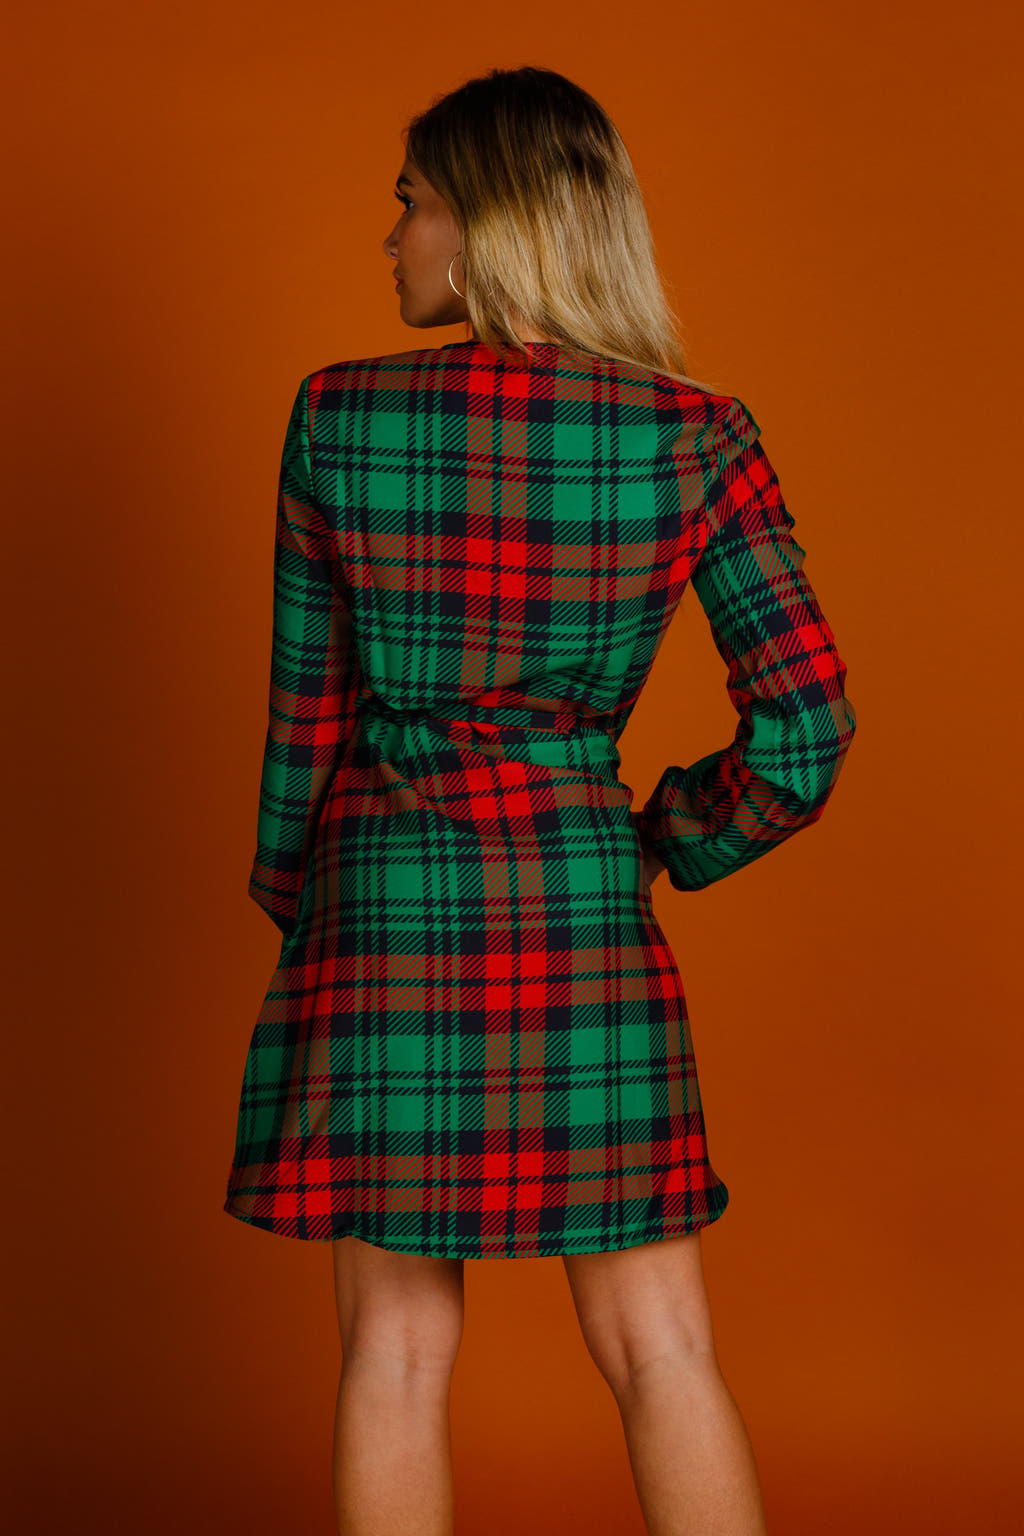 Red and green plaid dress